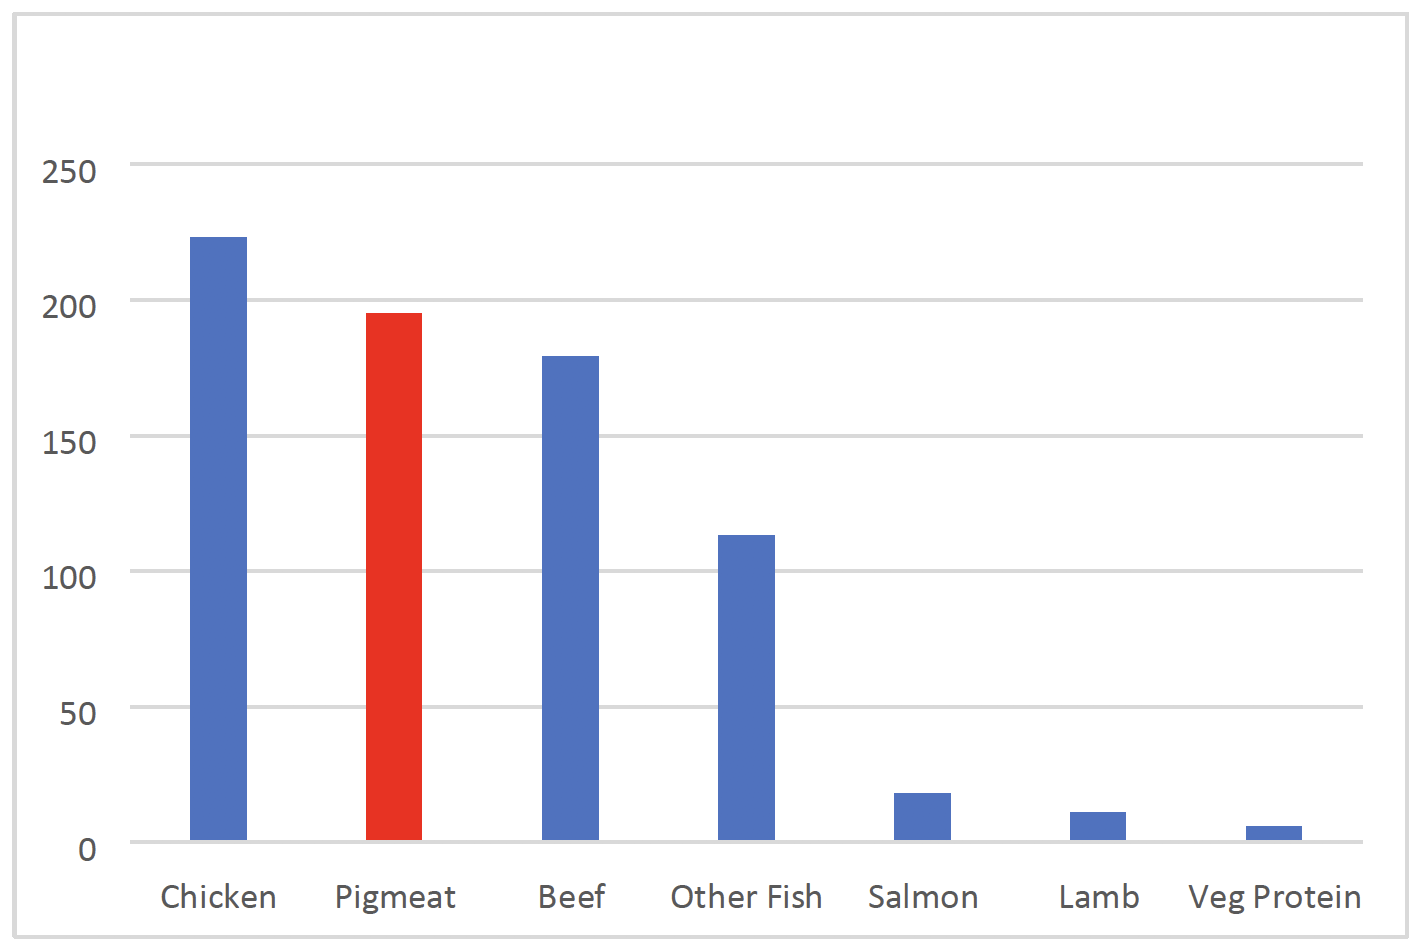 Bar chart illustrating levels of consumption of different protein sources in Scotland in 2019